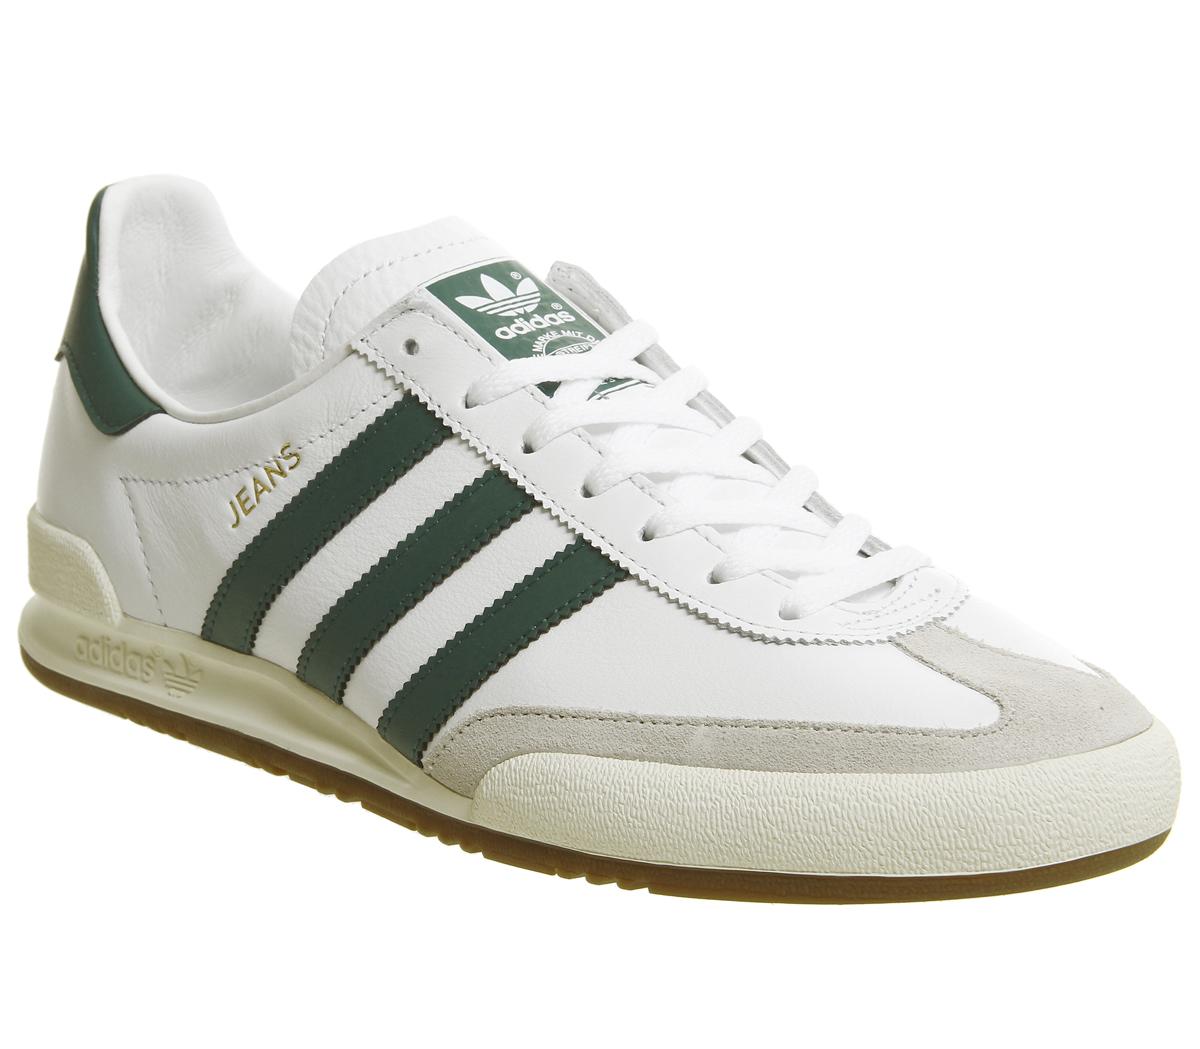 white adidas jeans trainers